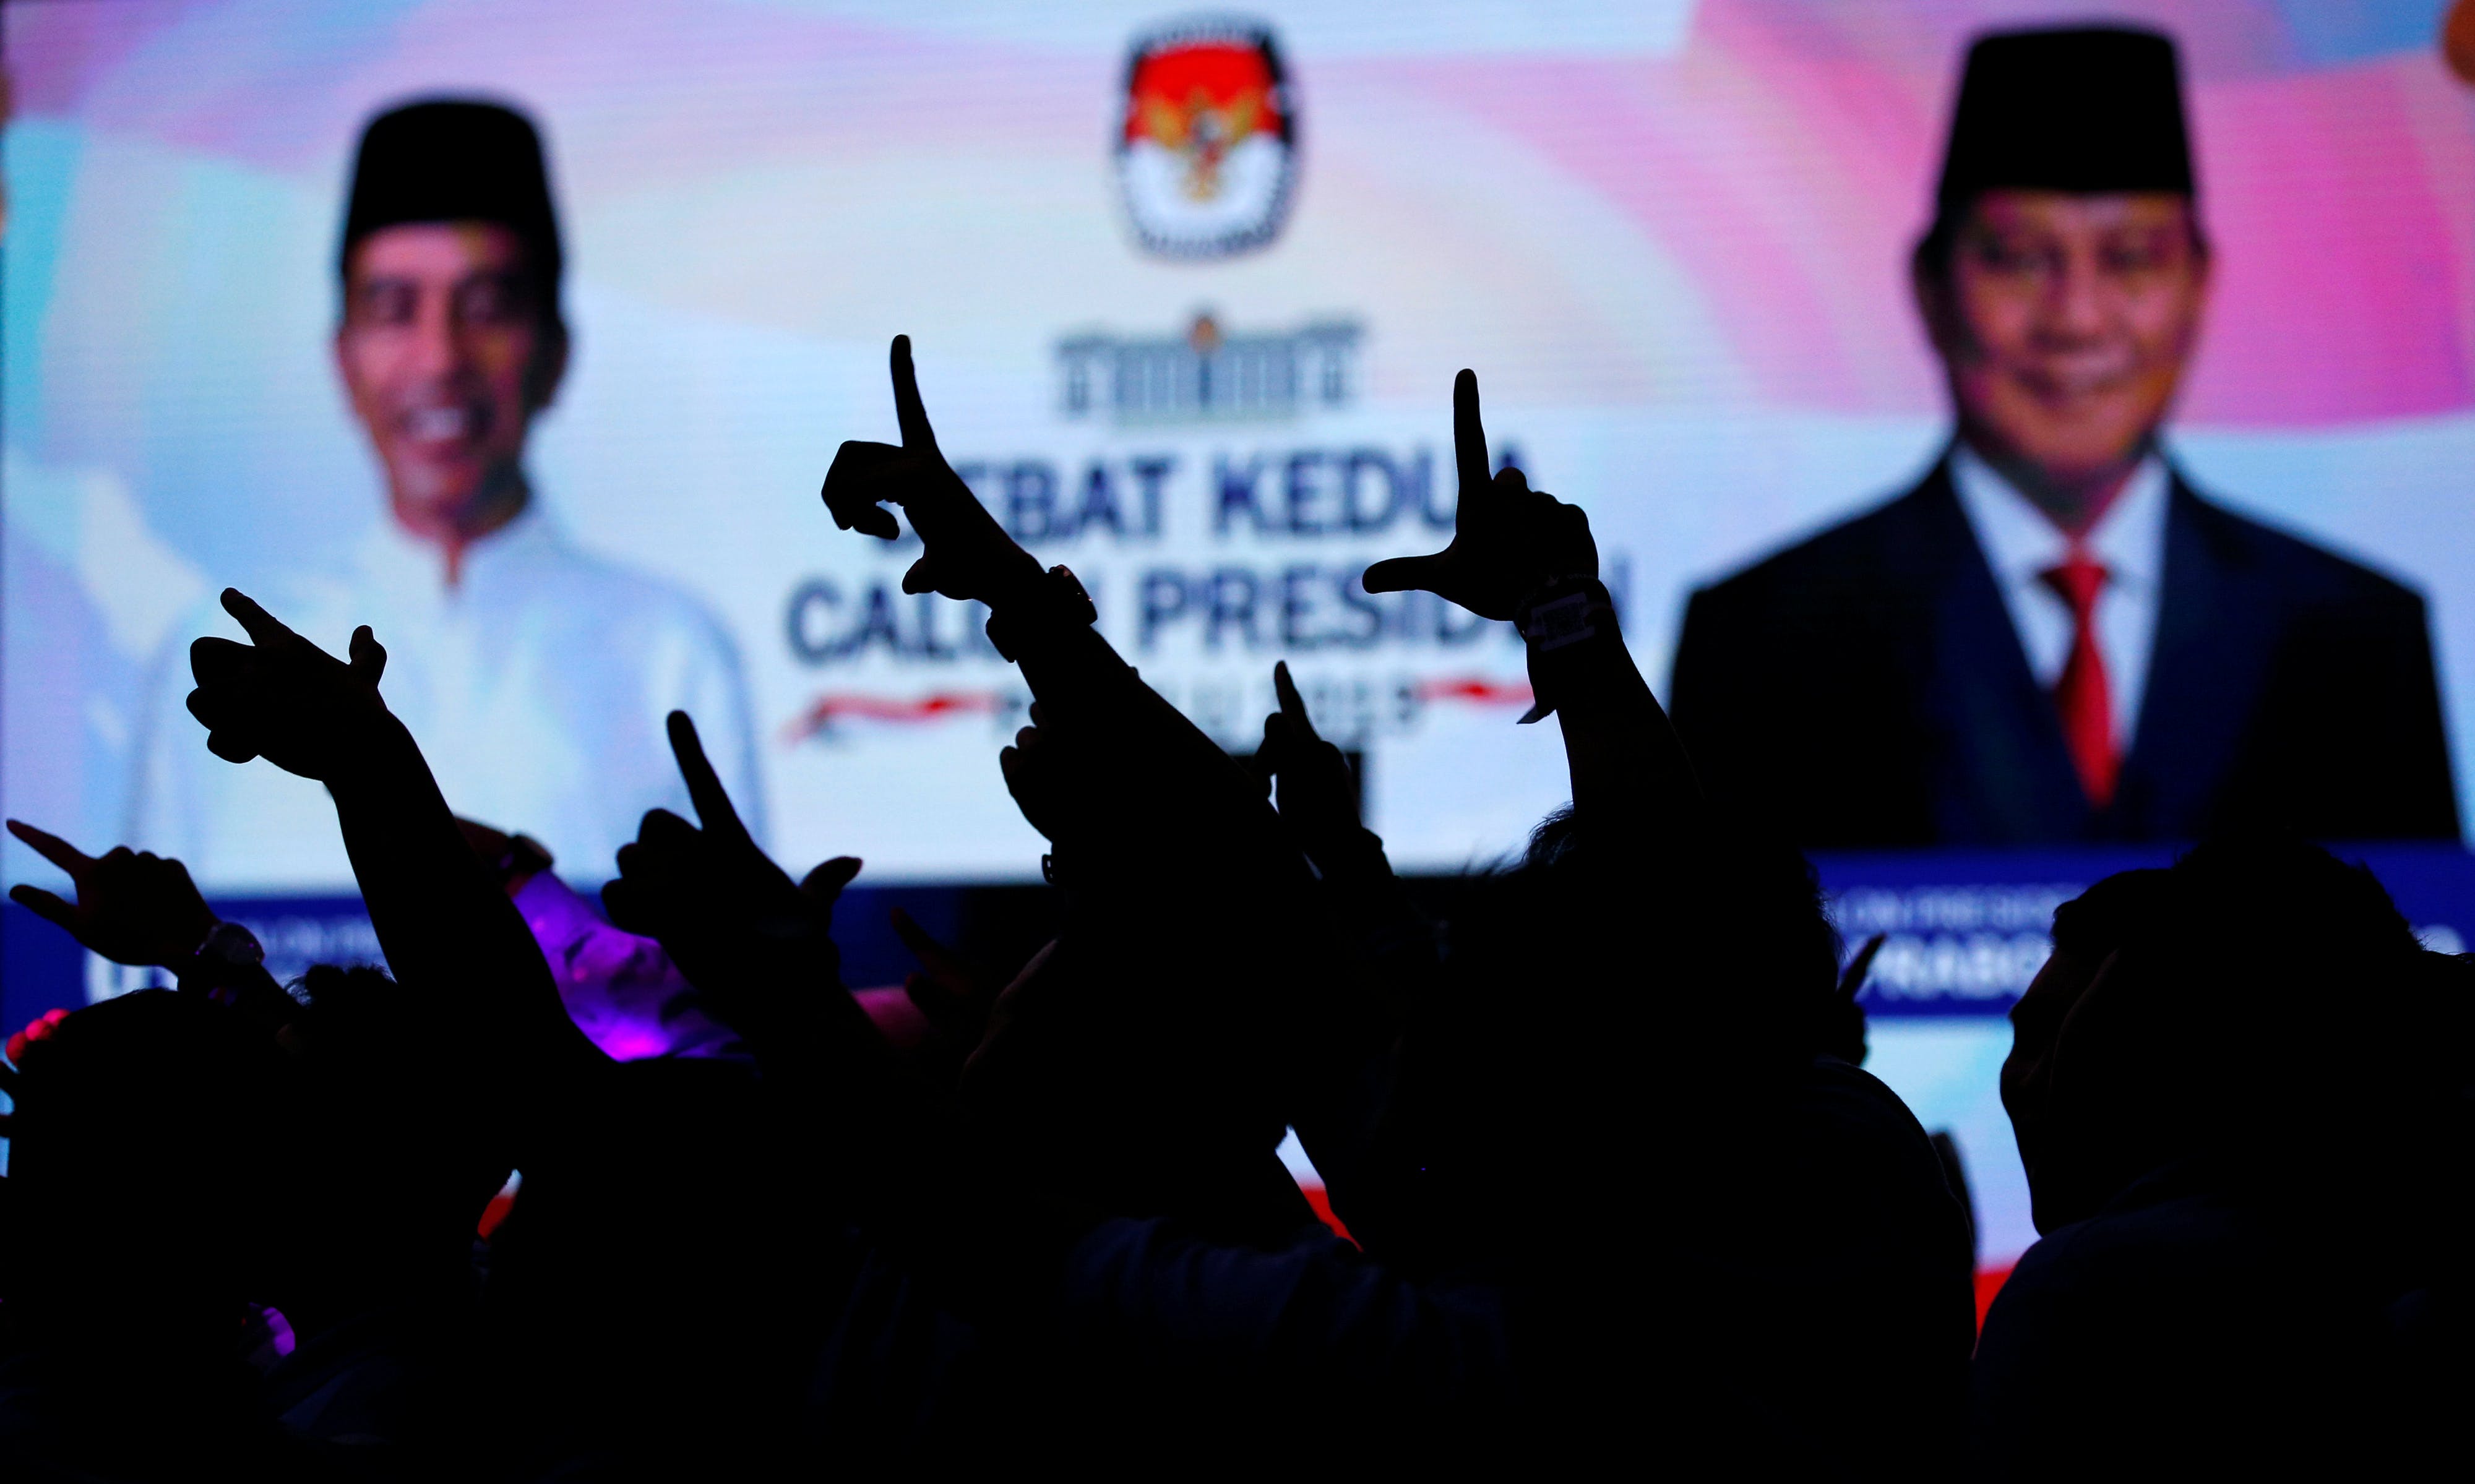 Indonesia Has an Urgent Need for Political and Media Literacy Education